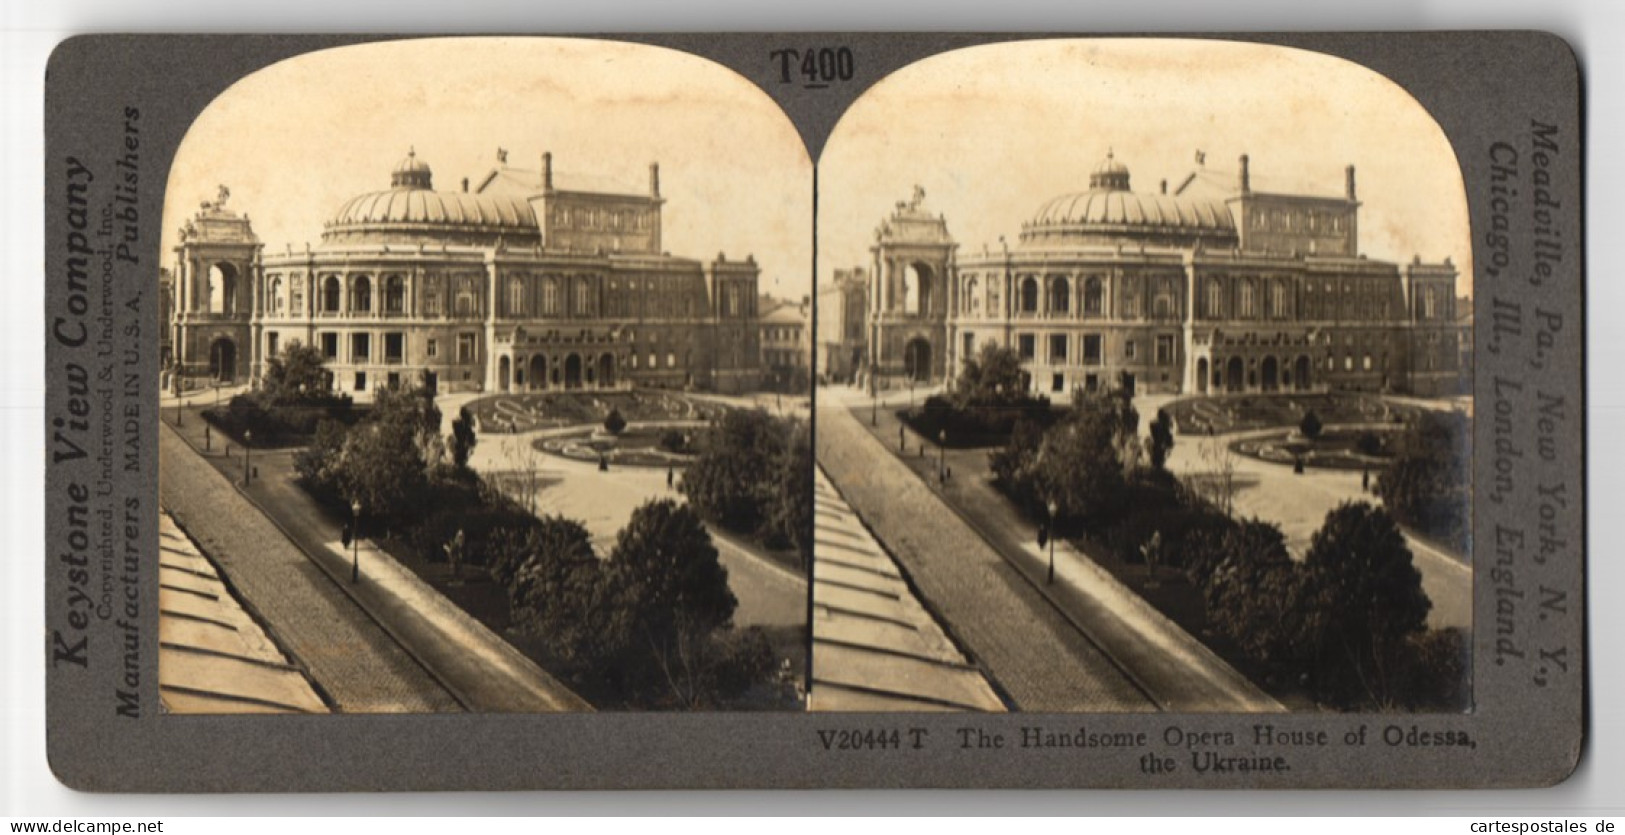 Stereo-Fotografie Keystone View Co., Meadville, Ansicht Odessa, The Handsome Opera House, Ukraine  - Stereo-Photographie